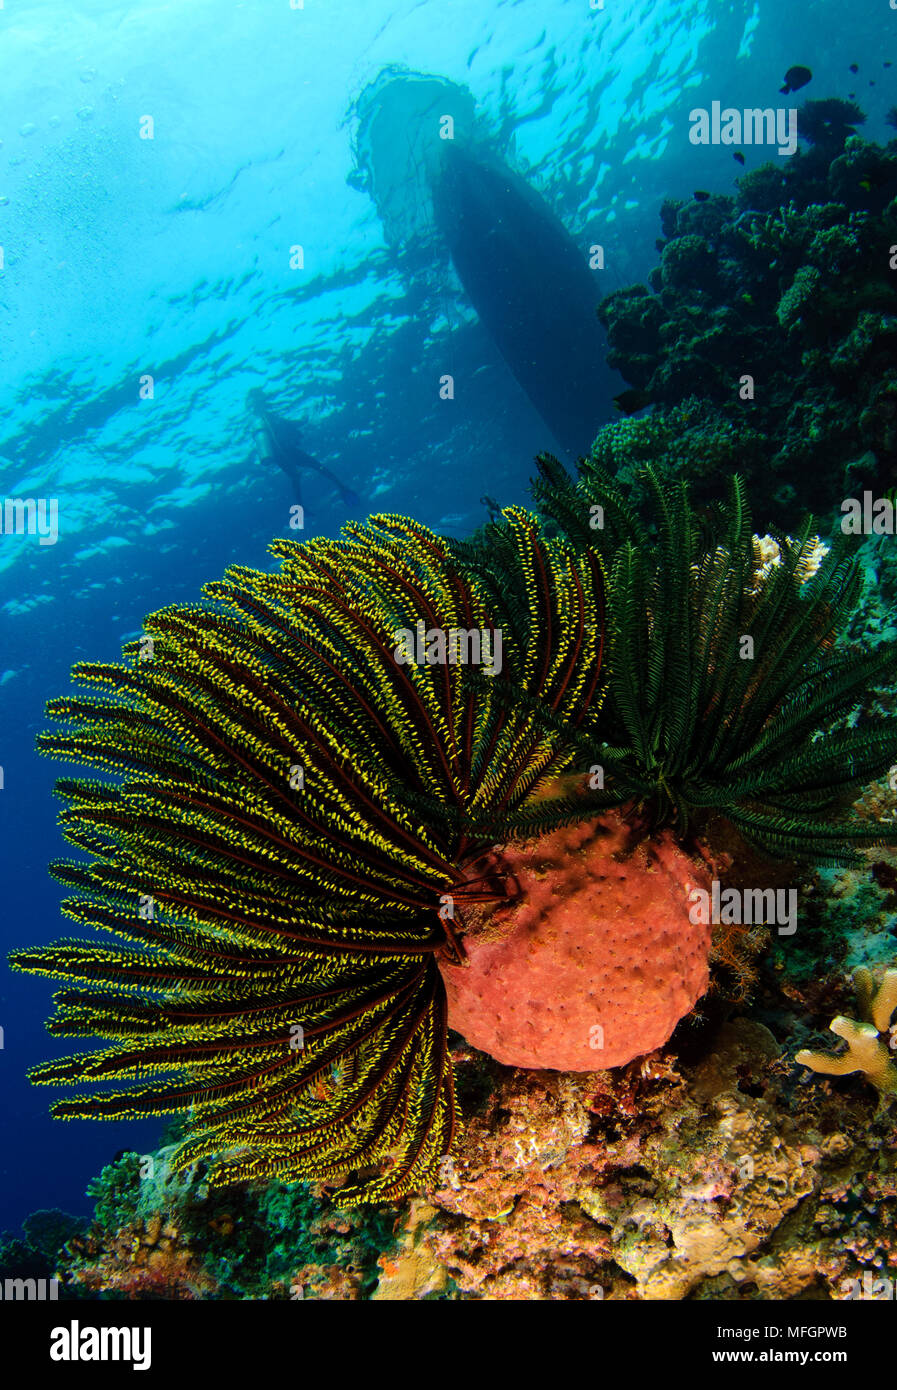 Schlegel's feather star (Comaster schlegelii) with boat in the background., Gorontalo, Sulawesi, Indonesia Stock Photo